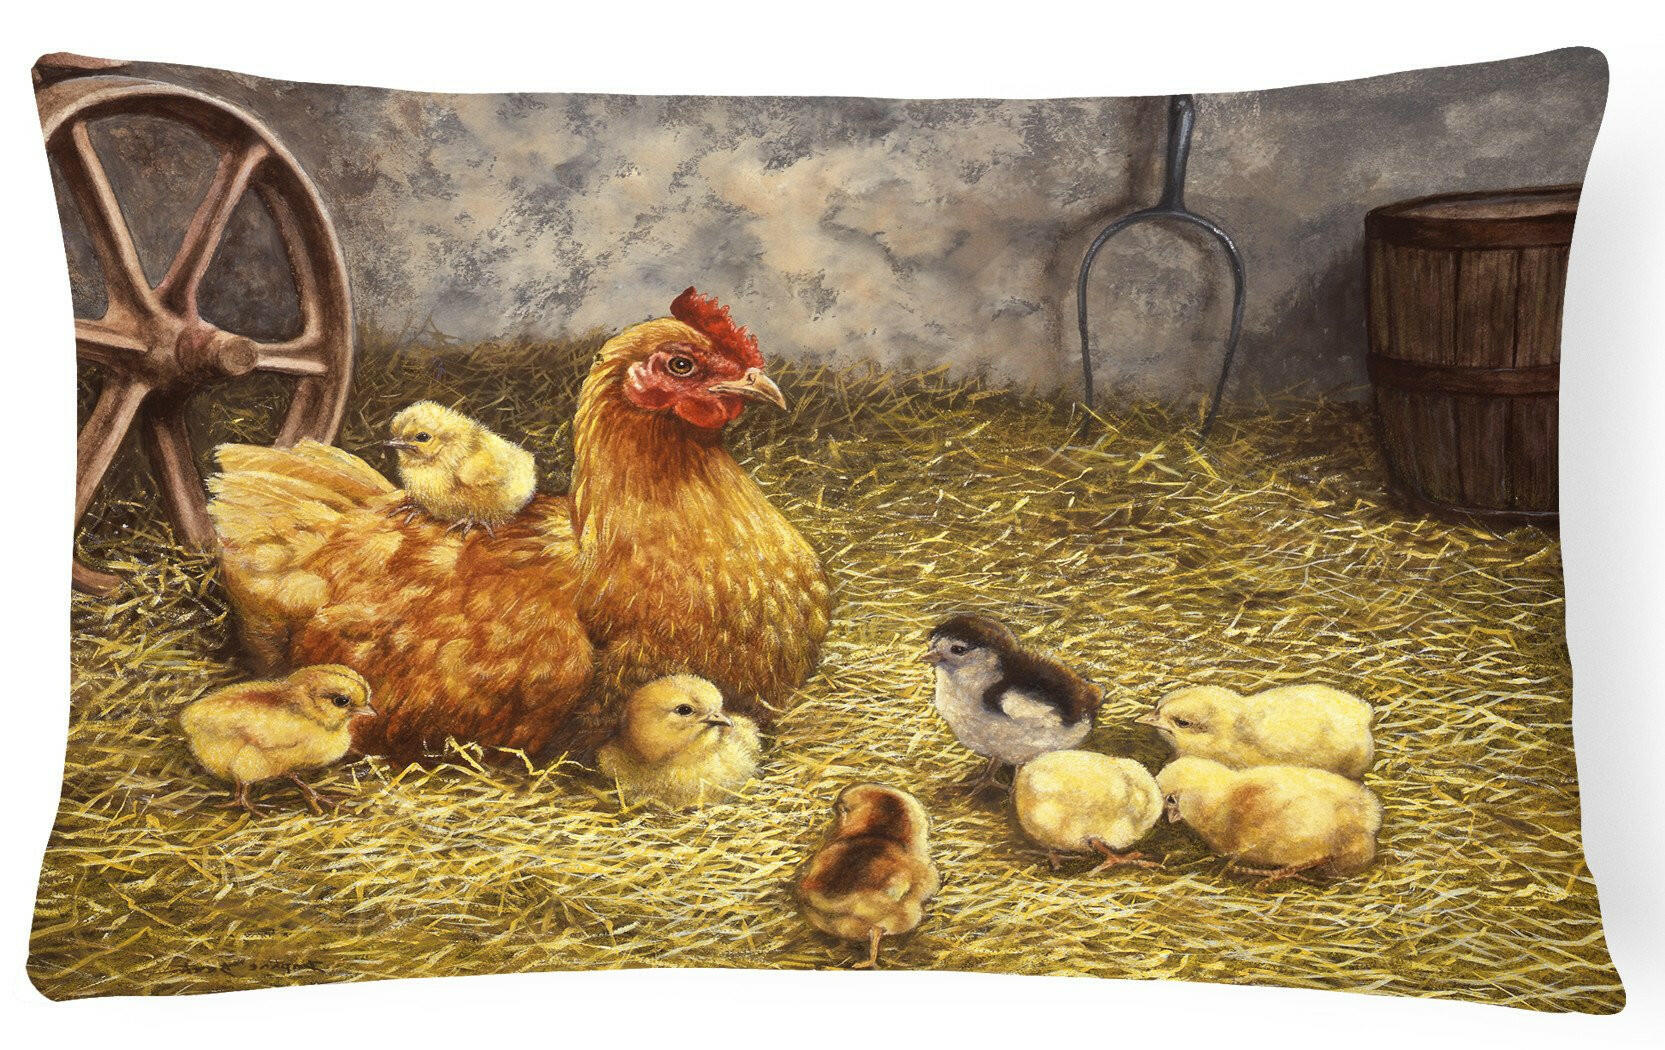 Chicken Hen and Her Chicks Fabric Decorative Pillow BDBA0176PW1216 by Caroline's Treasures